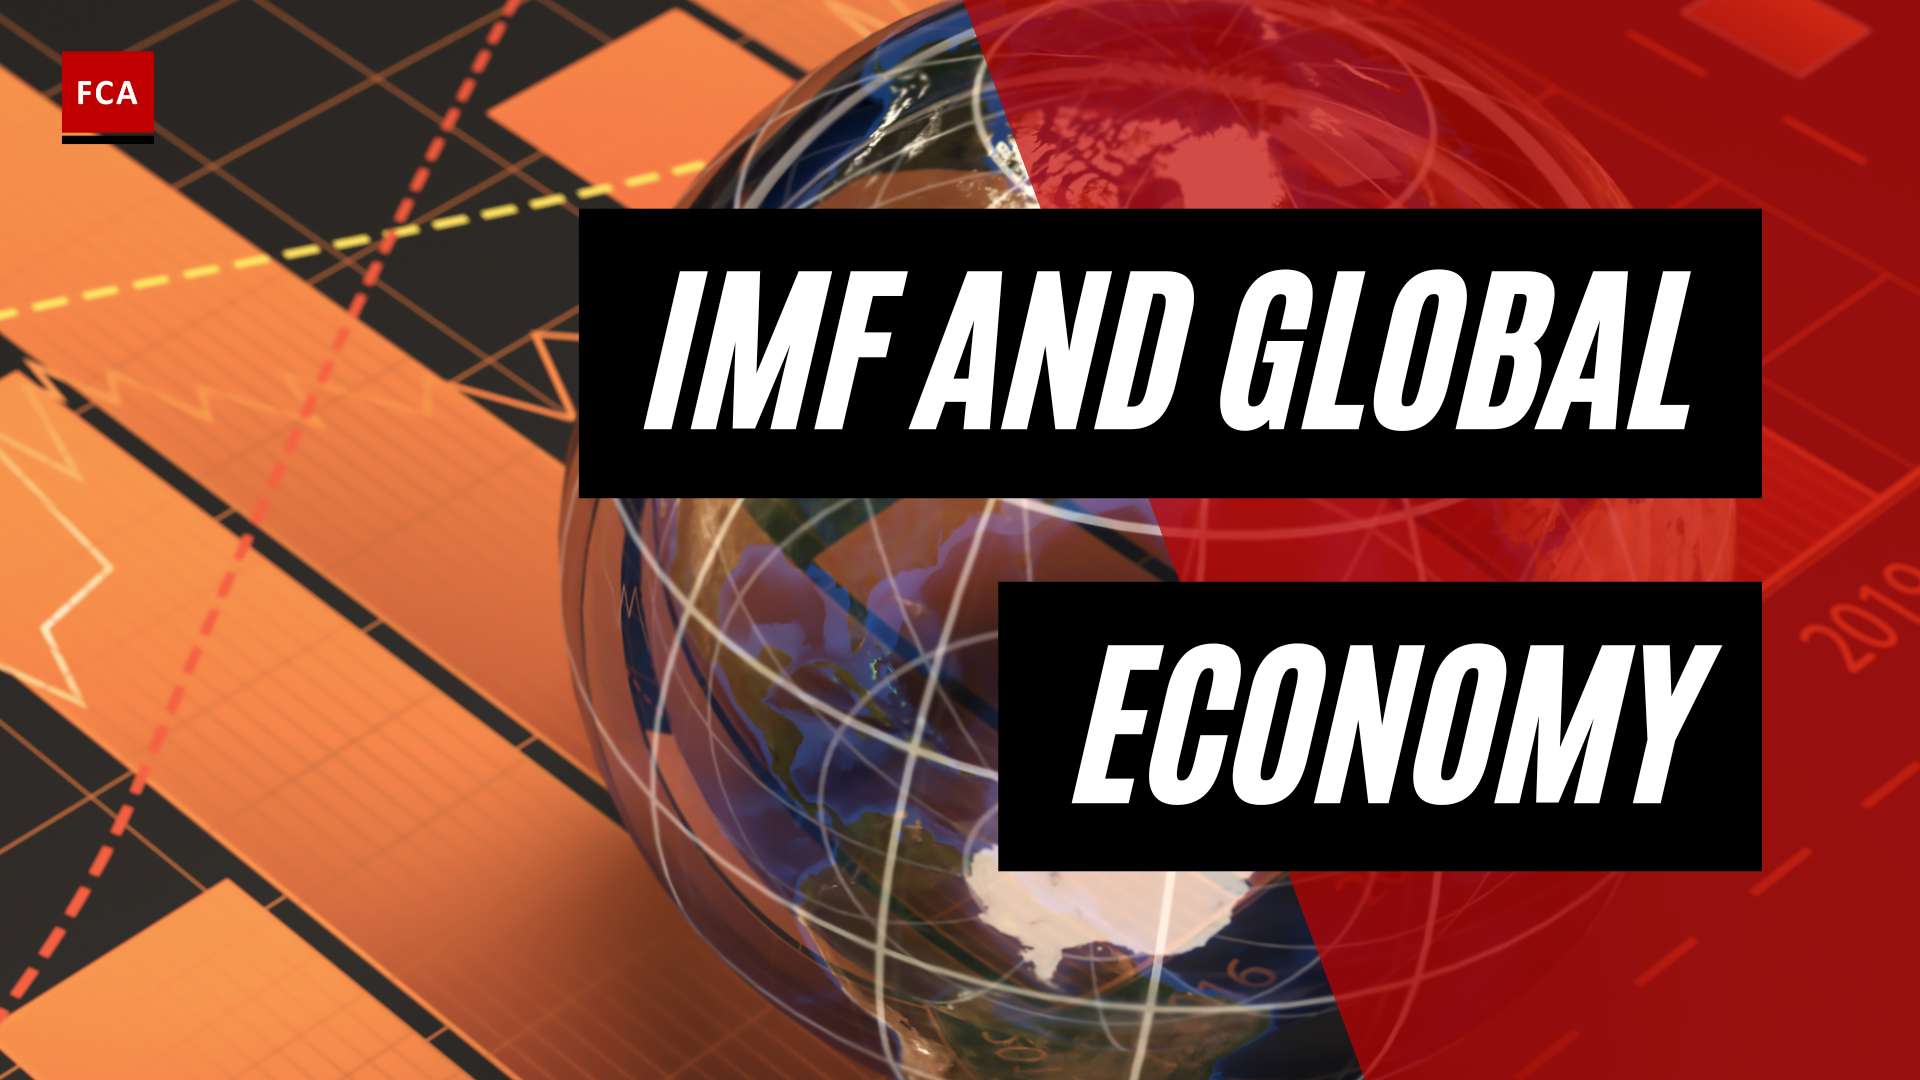 The Imfs Mighty Influence: Navigating The Global Economy